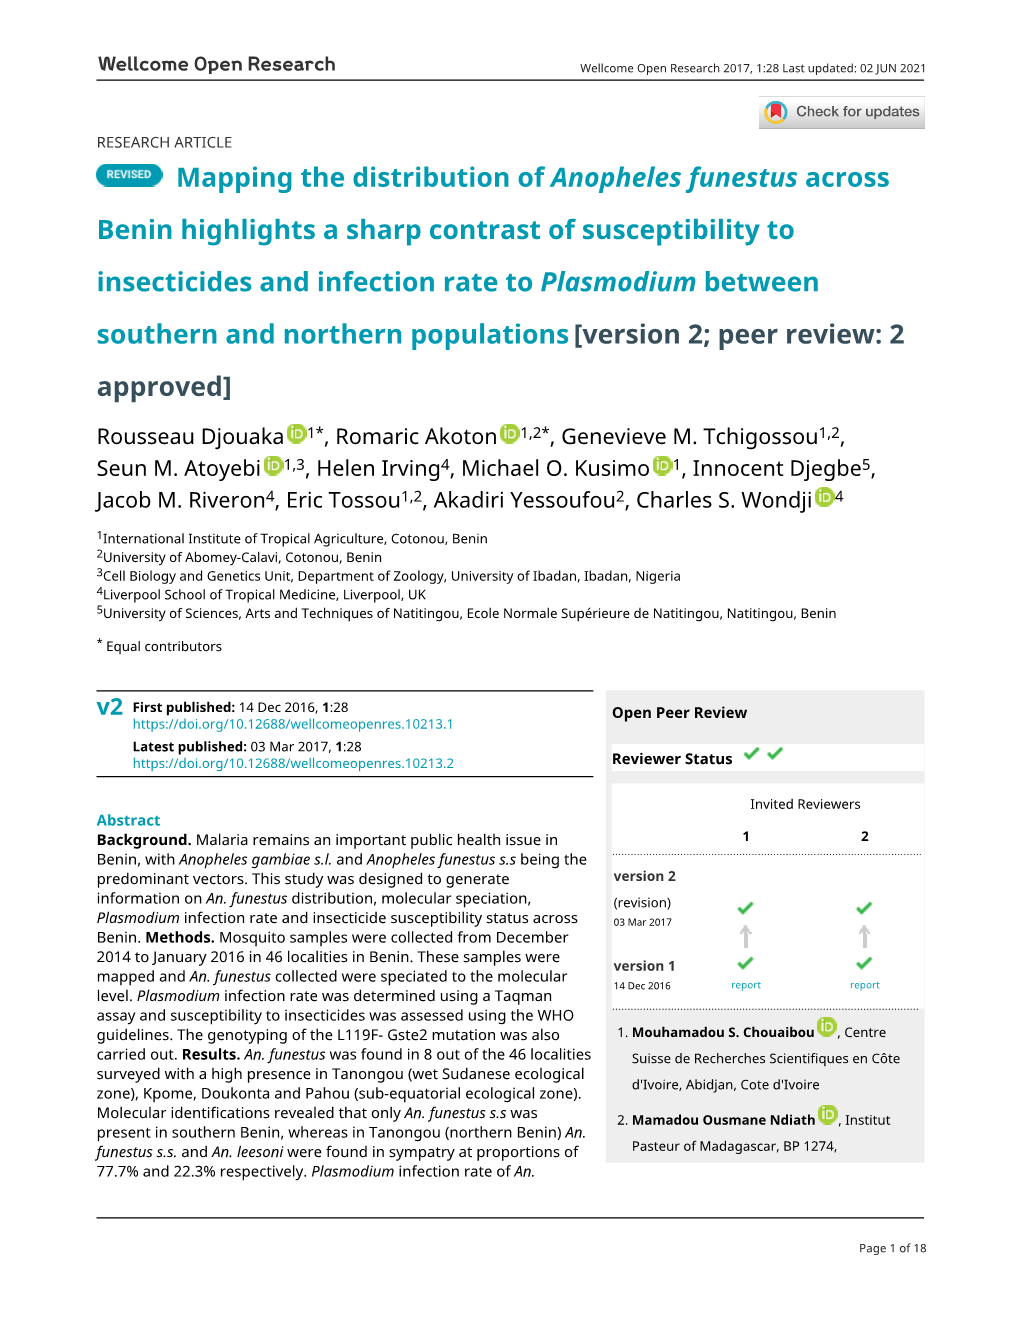 Mapping the Distribution of Anopheles Funestus Across Benin Highlights A